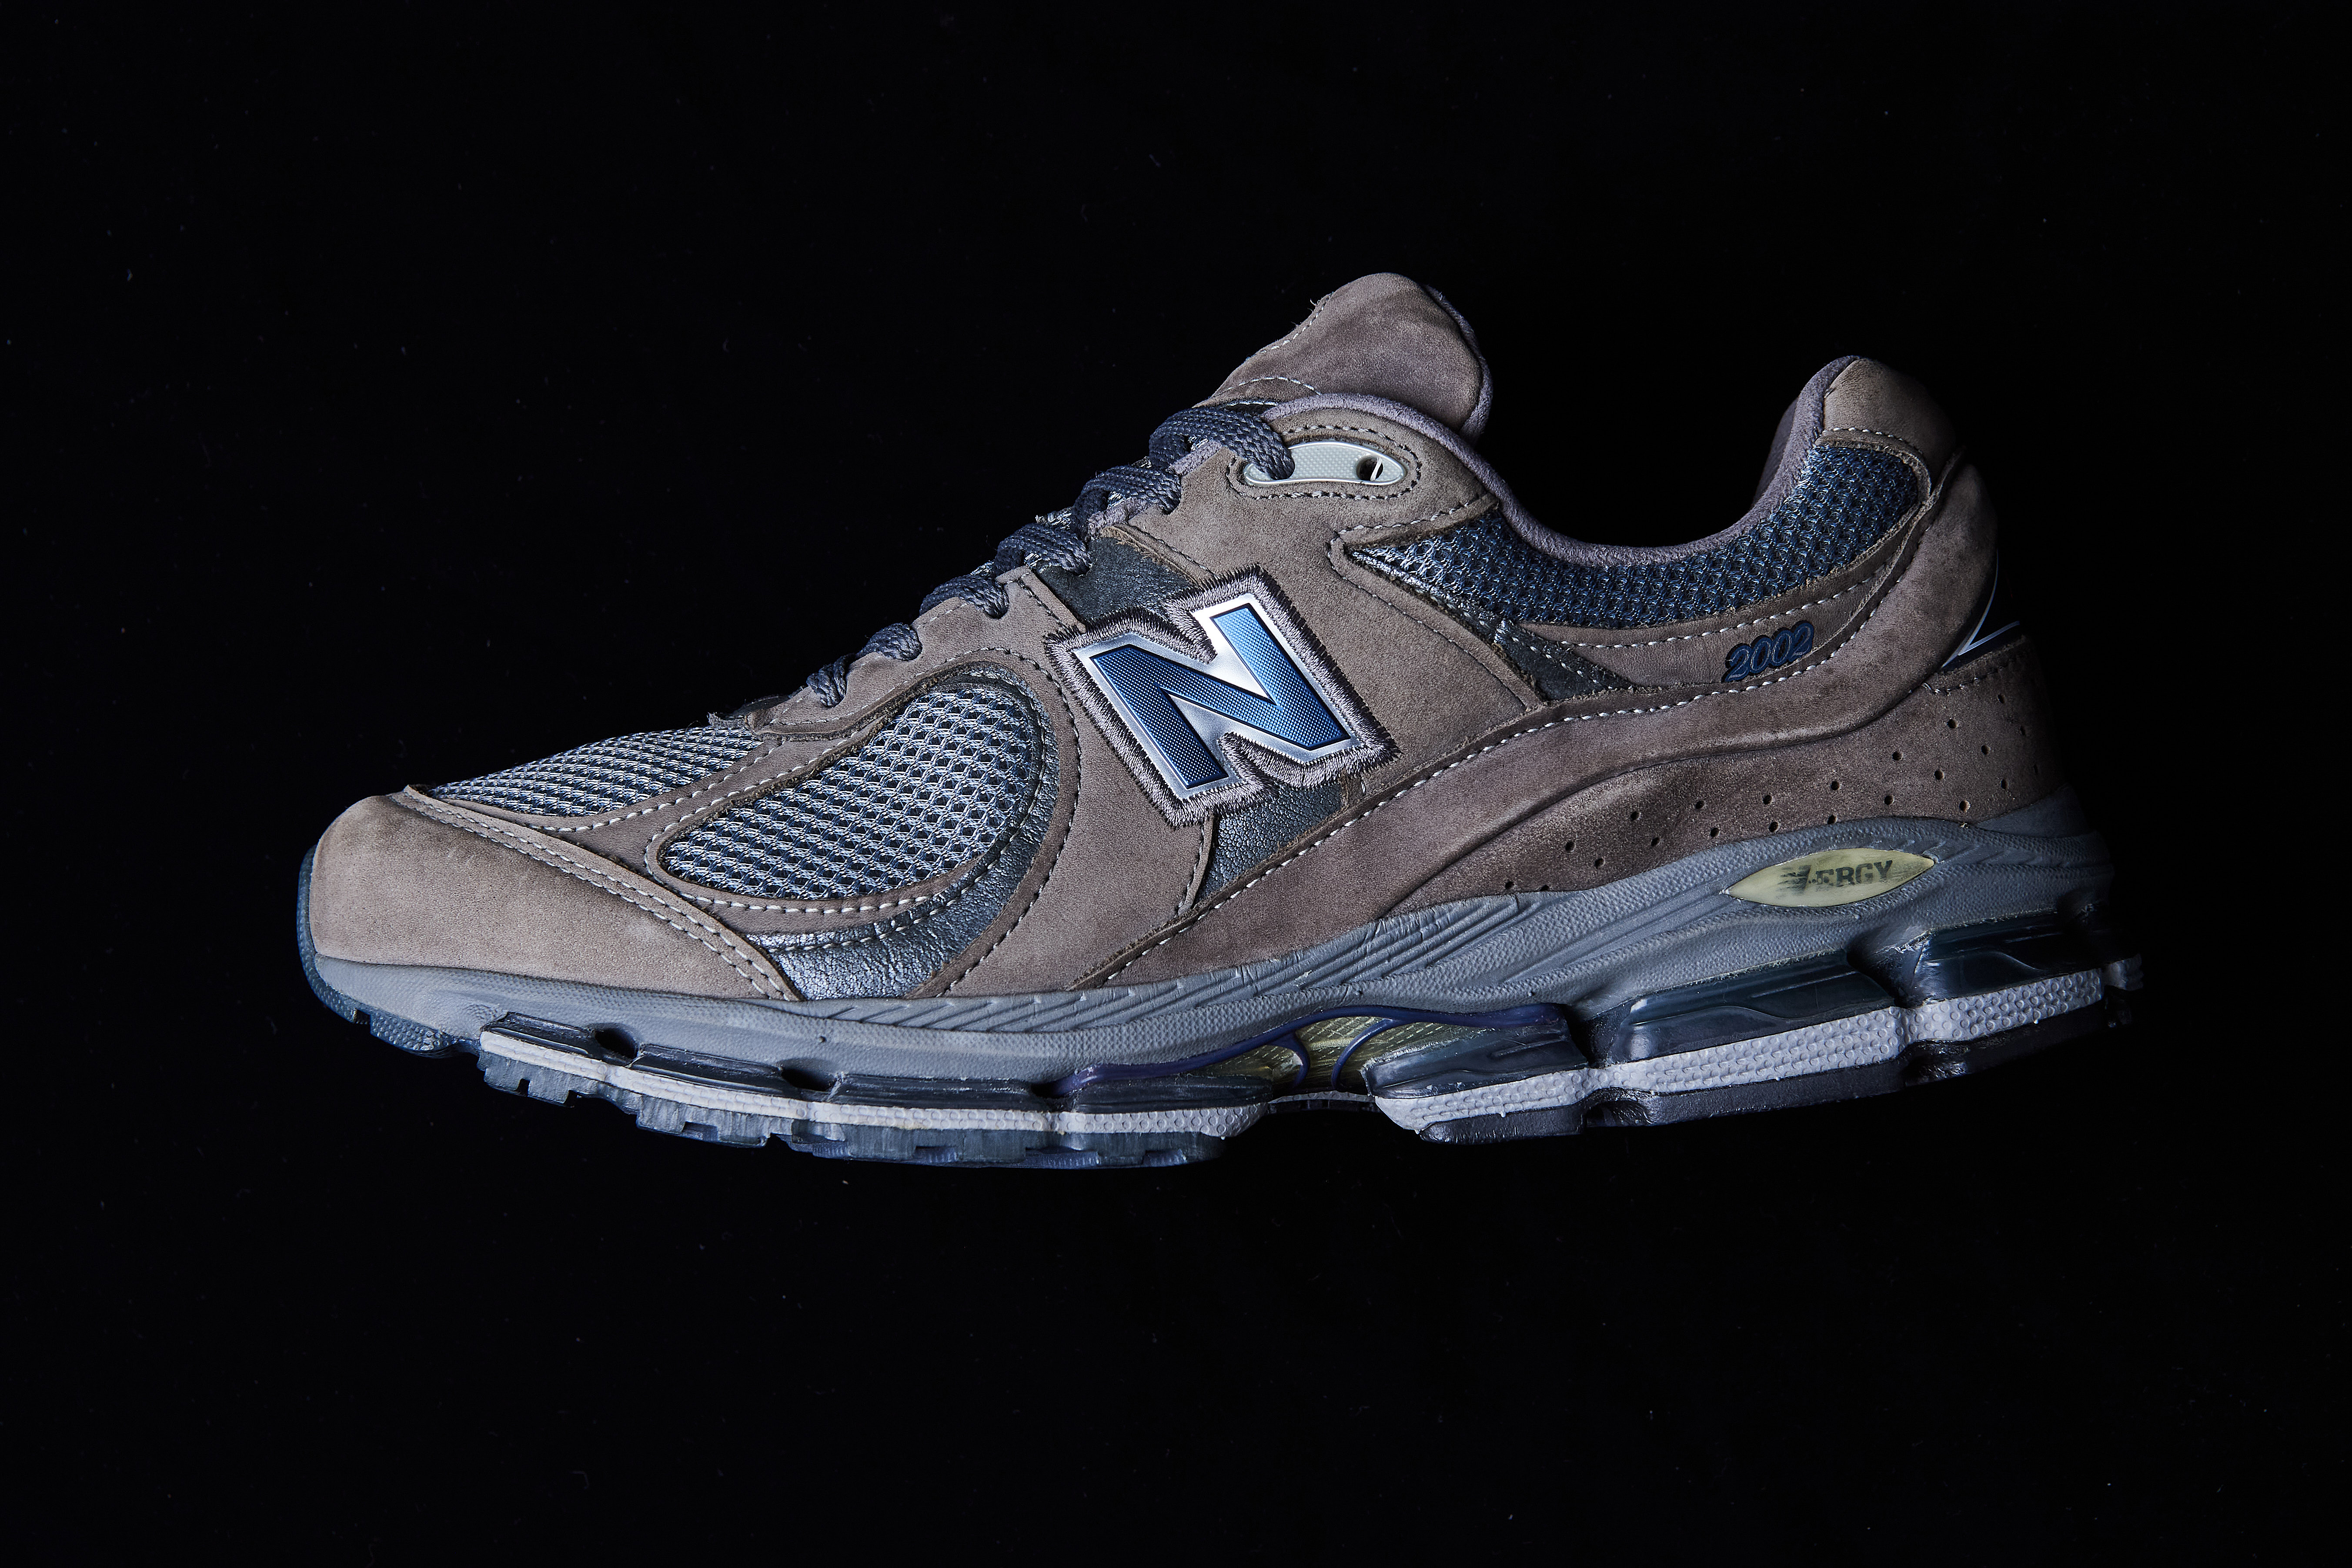 New Balance 20002 MADE IN U.S.A状態は画像をご確認ください - 靴